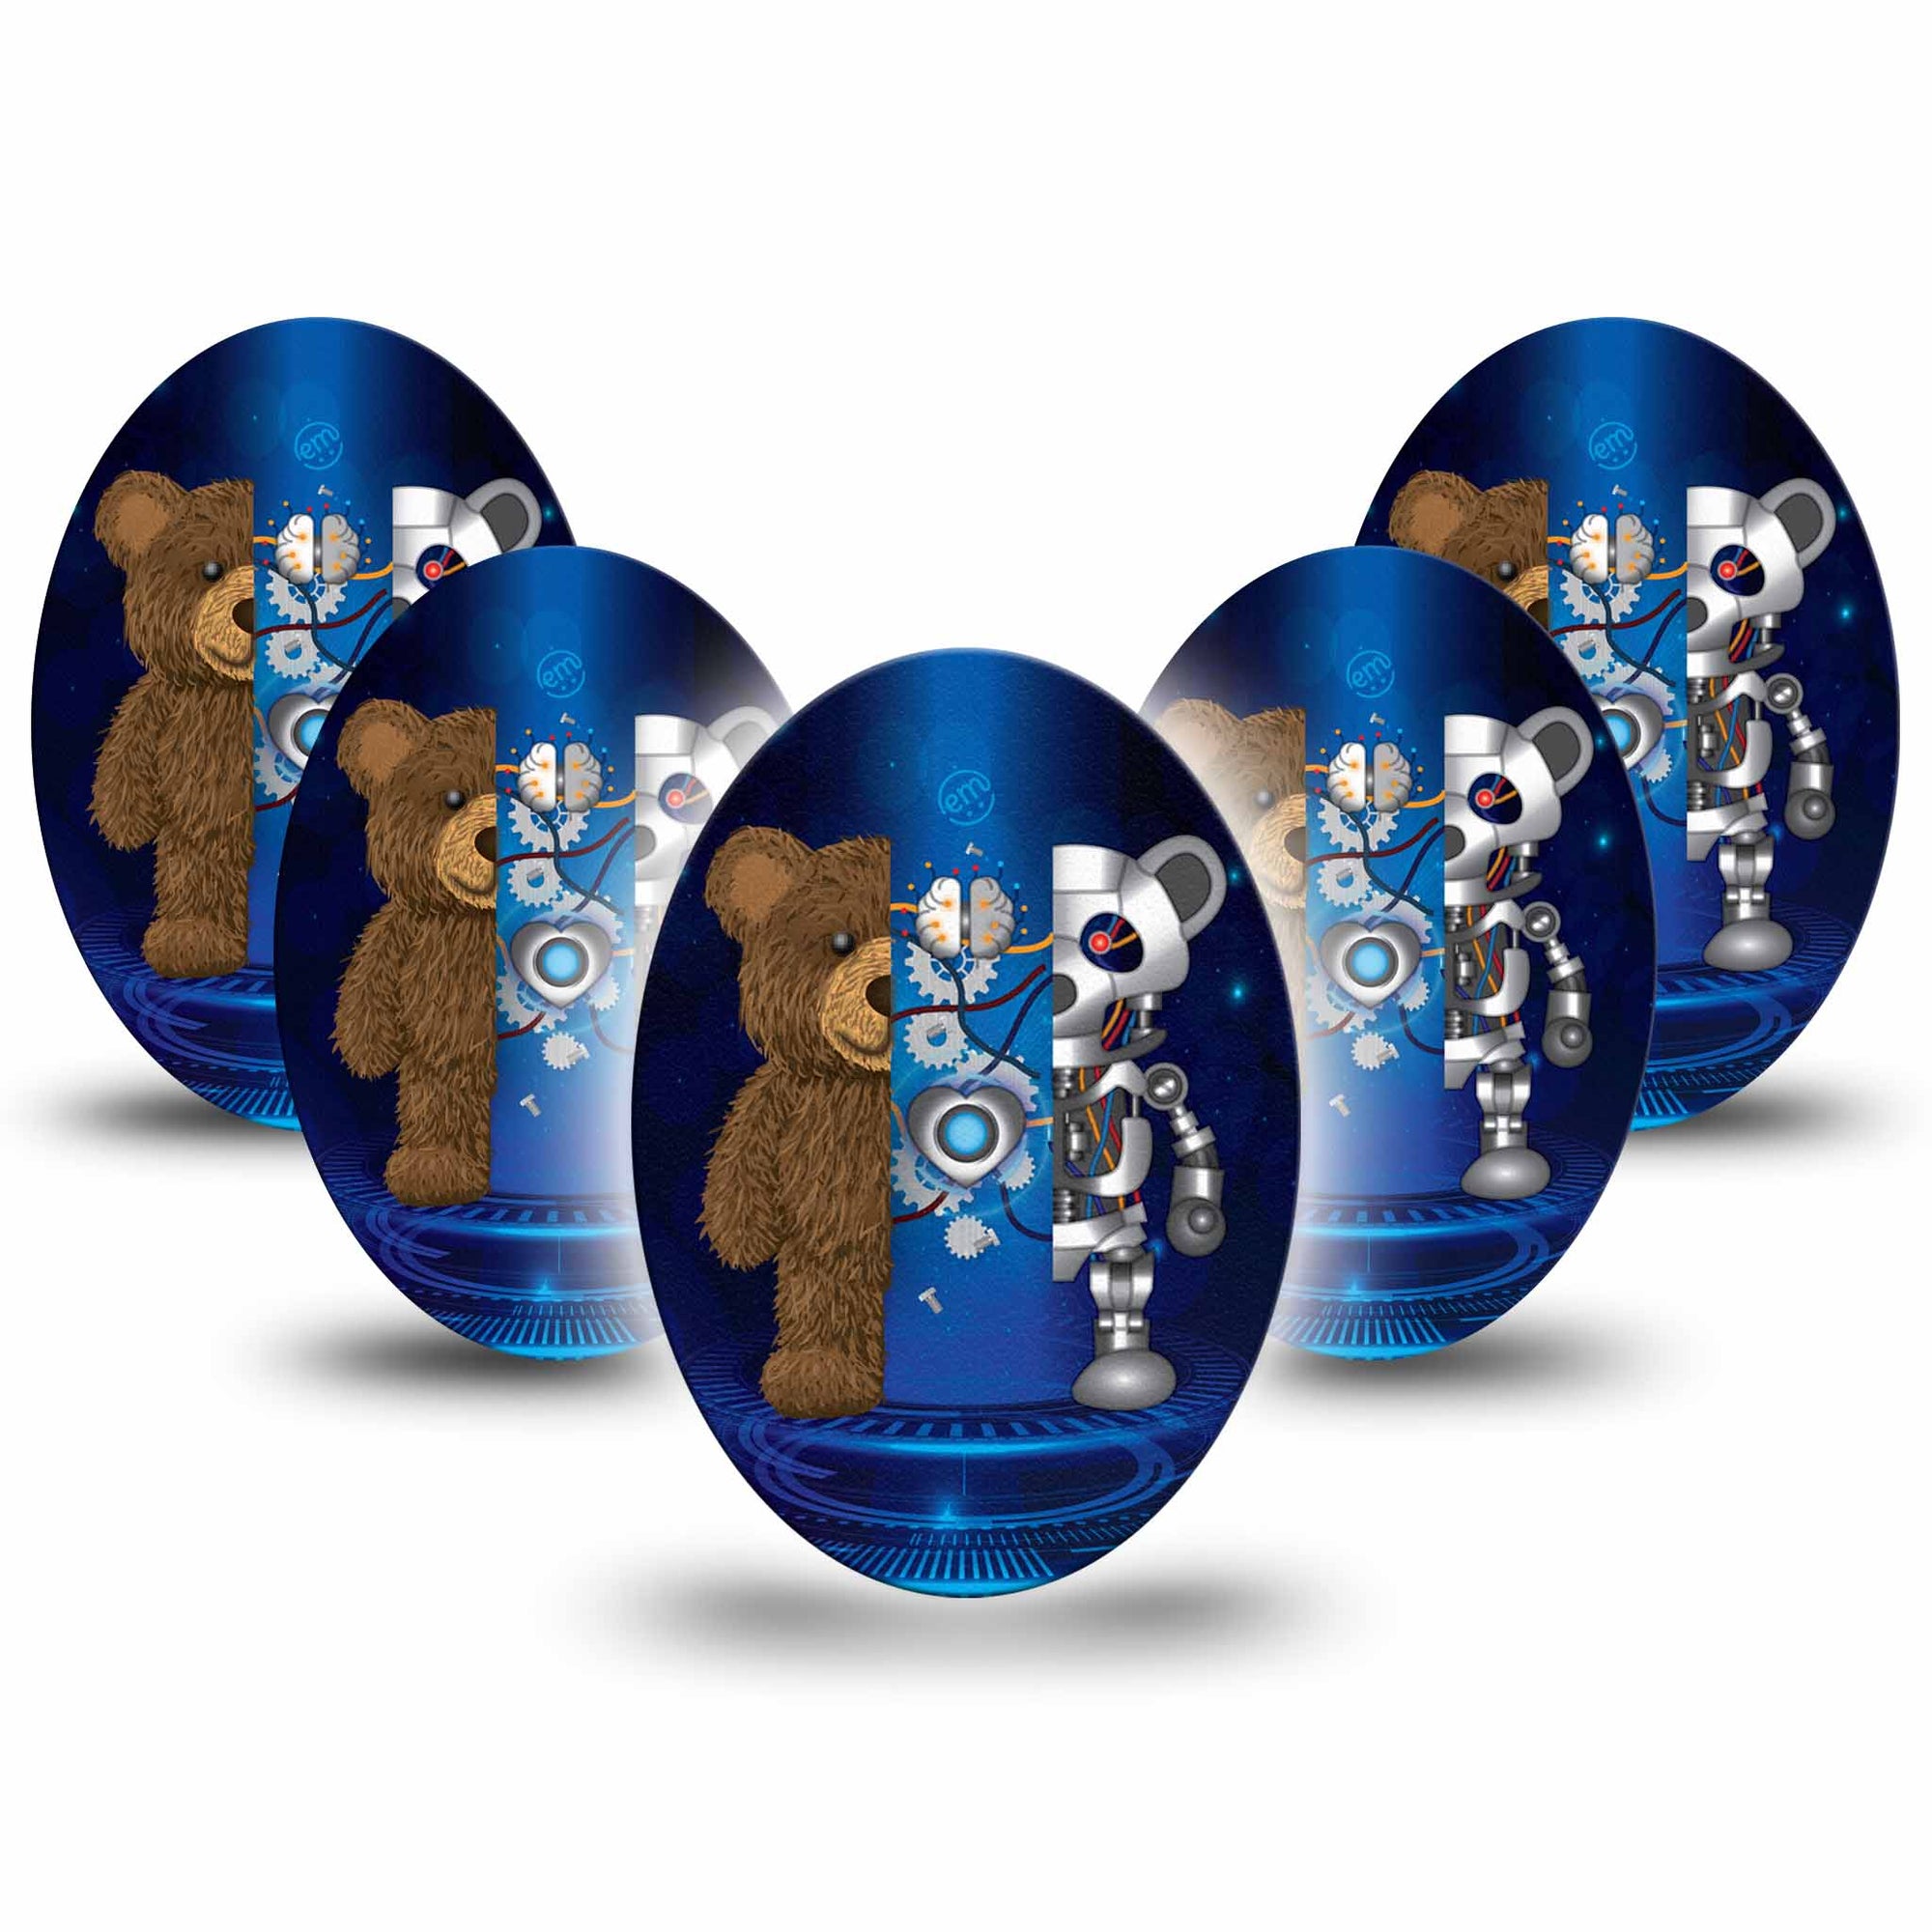 Medtronic Enlite / Guardian ExpressionMed Robo Teddy Universal Oval Patch, 5-Pack, Half Teddy Bear, Half Teddy Robot CGM Adhesive Tape Design